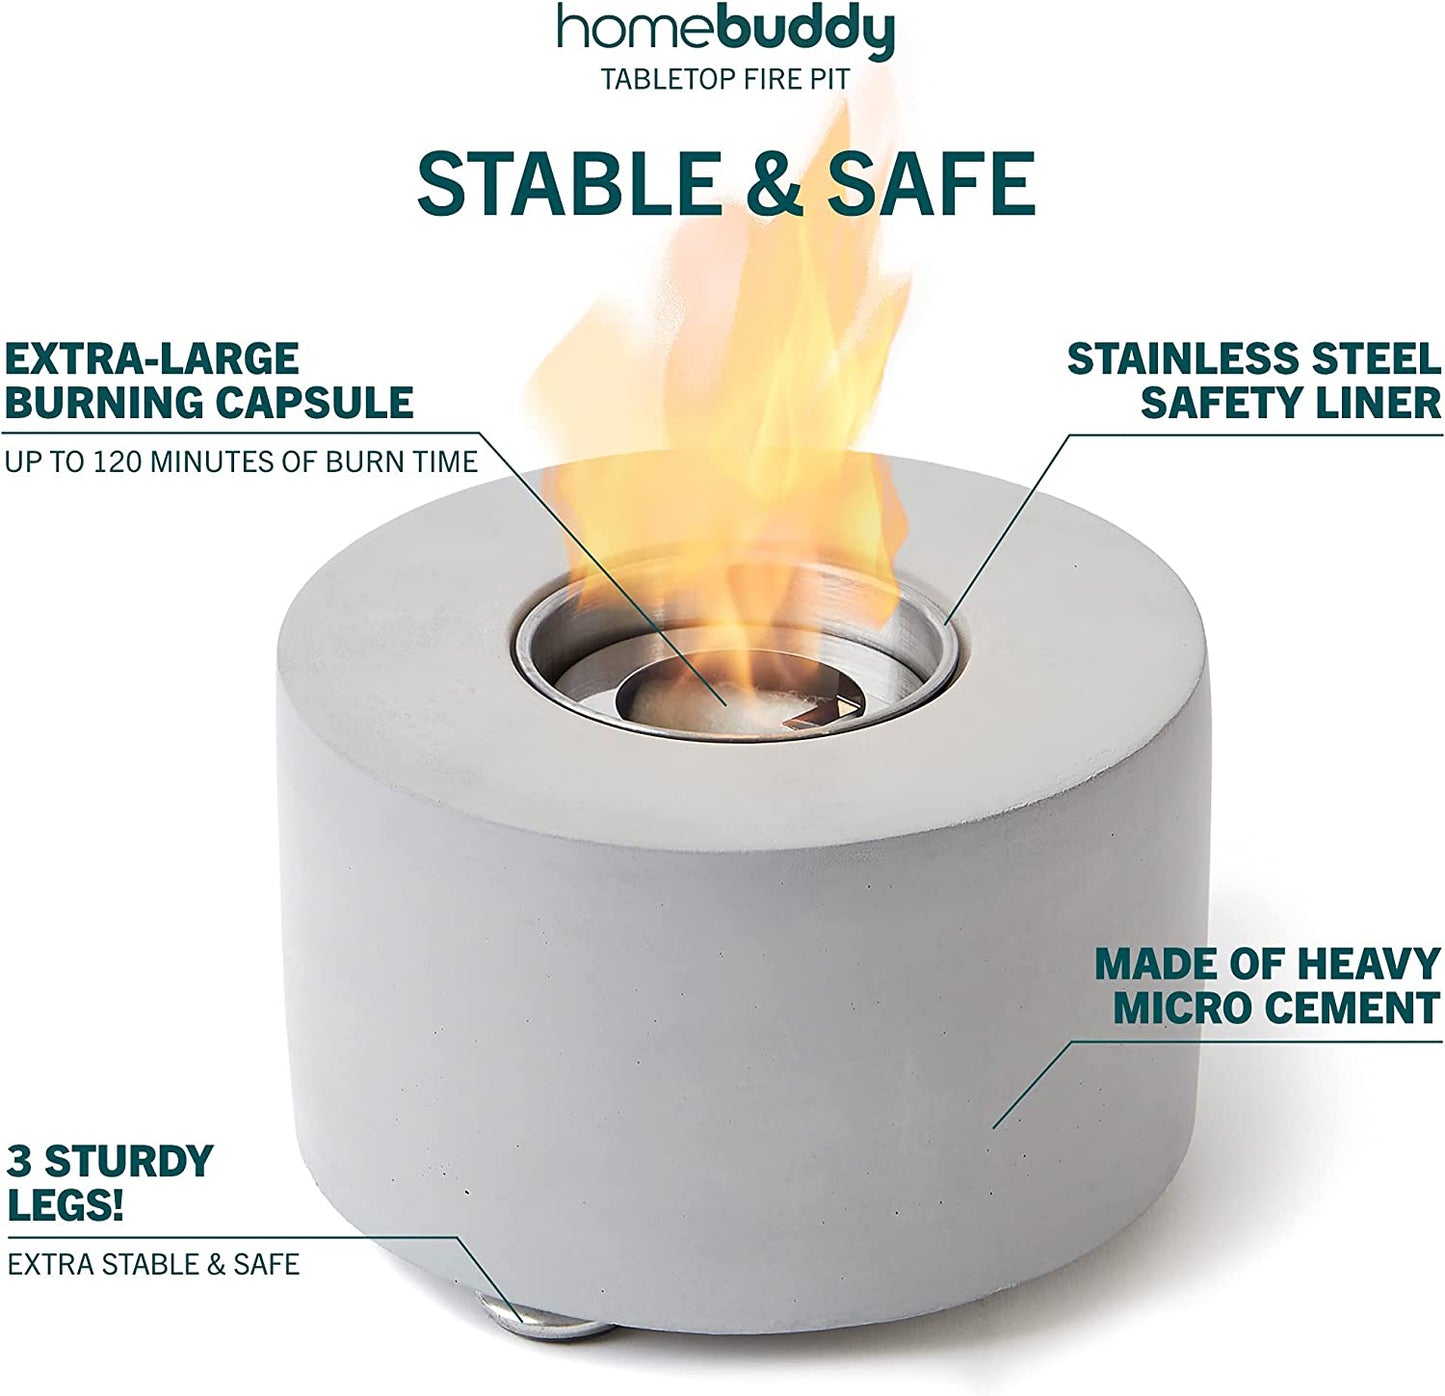 A list of features for the Homebuddy tabletop fire pit. The text says, "extra large burning capsule, 3 sturdy legs, stainless steel safety liner, made of heavy micro cement."